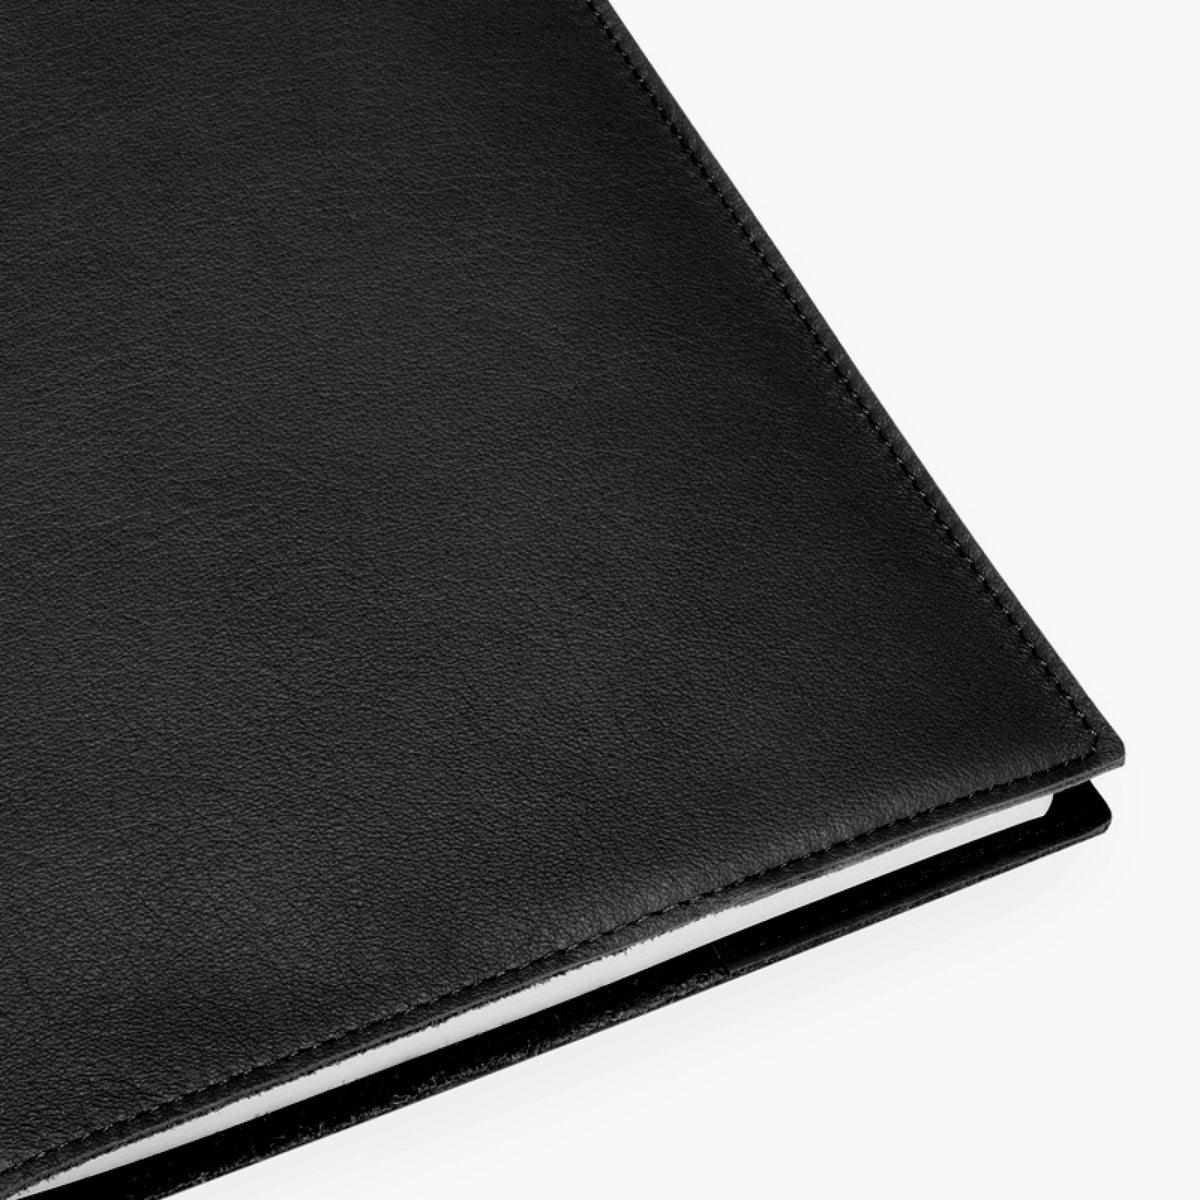 Bookbinders Design - Notebook - Leather - A4 - Black